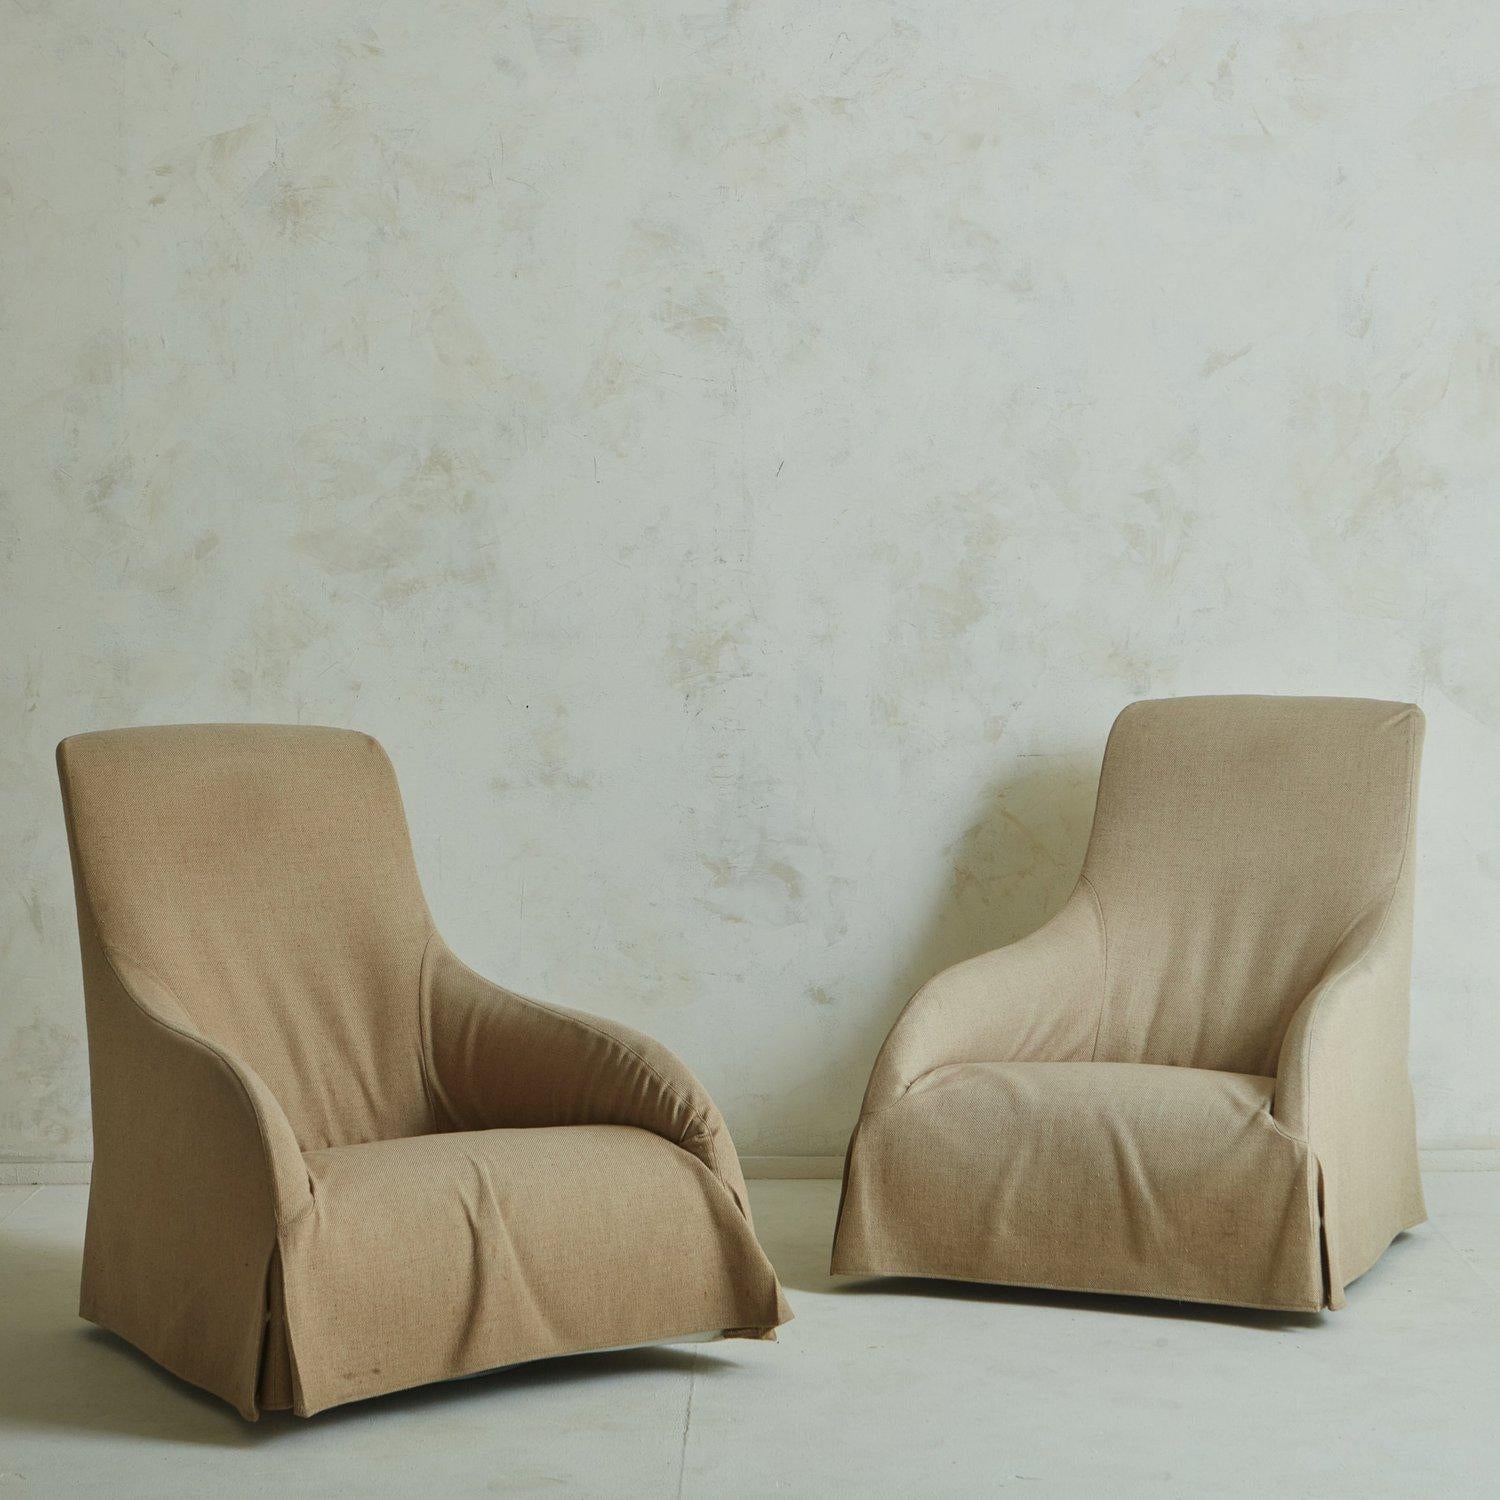 A pair of ‘Kalos’ swivel lounge chairs designed by Antonio Citterio and manufactured by Maxalto in Italy. These sculptural chairs feature tall, angled seat backs and curved arms. They retain their original woven tan slipcovers. Retain ‘B&B Italia /